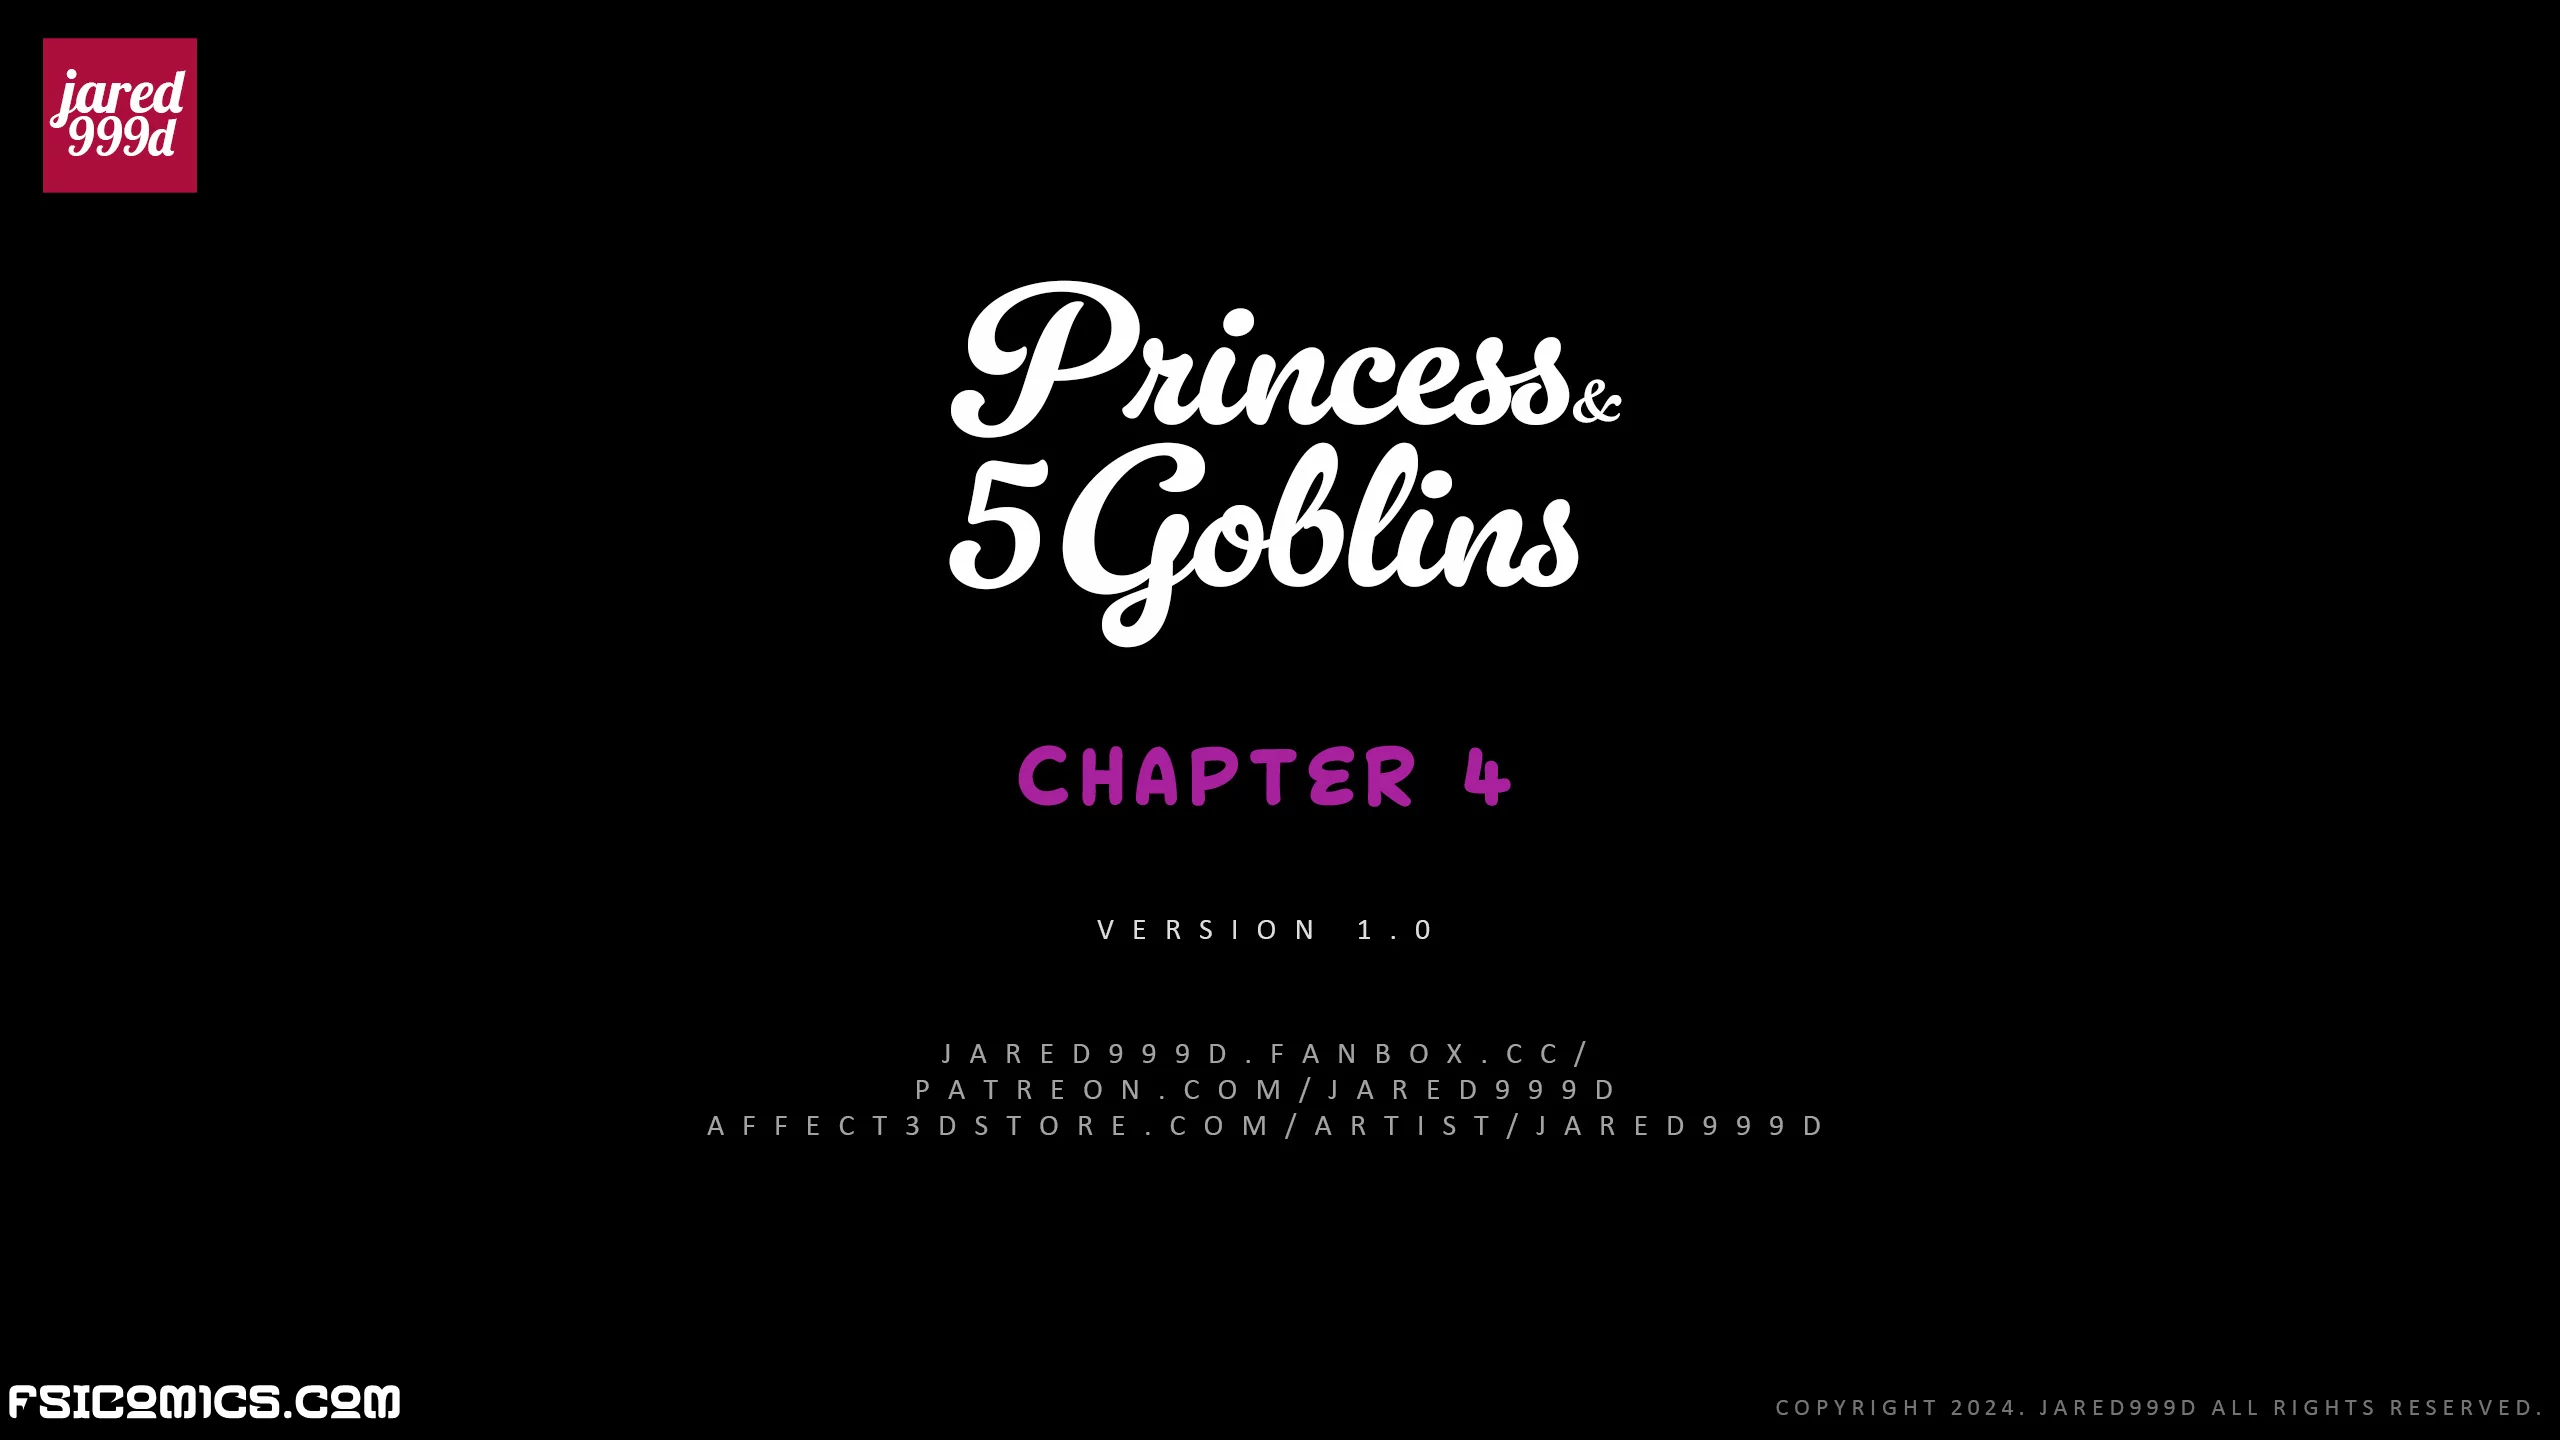 Princess And 5 Goblins Chapter 4 - Jared999D - 27 - FSIComics